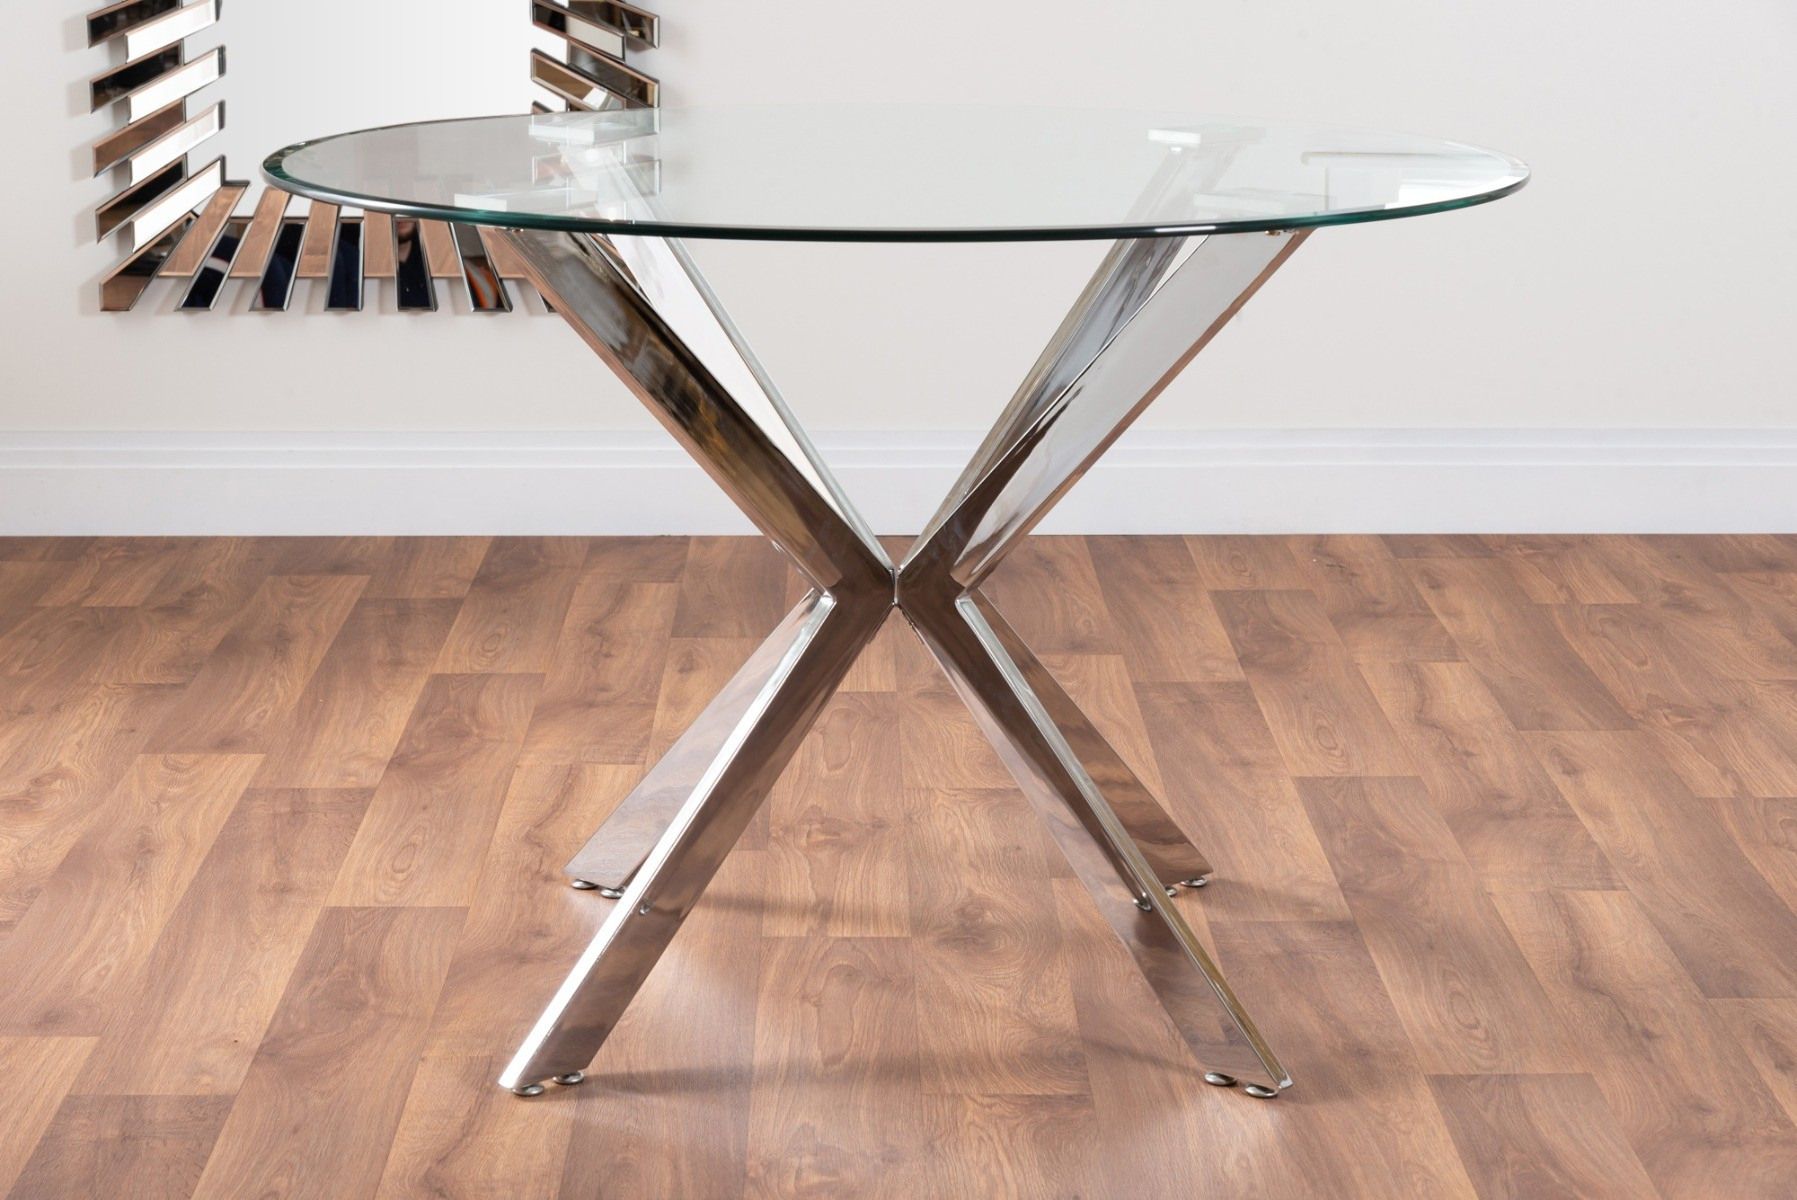 Venice Glass Chrome Table & 4 Milan Chairs | Furniturebox Inside Milan Glass Tv Stands (View 13 of 15)